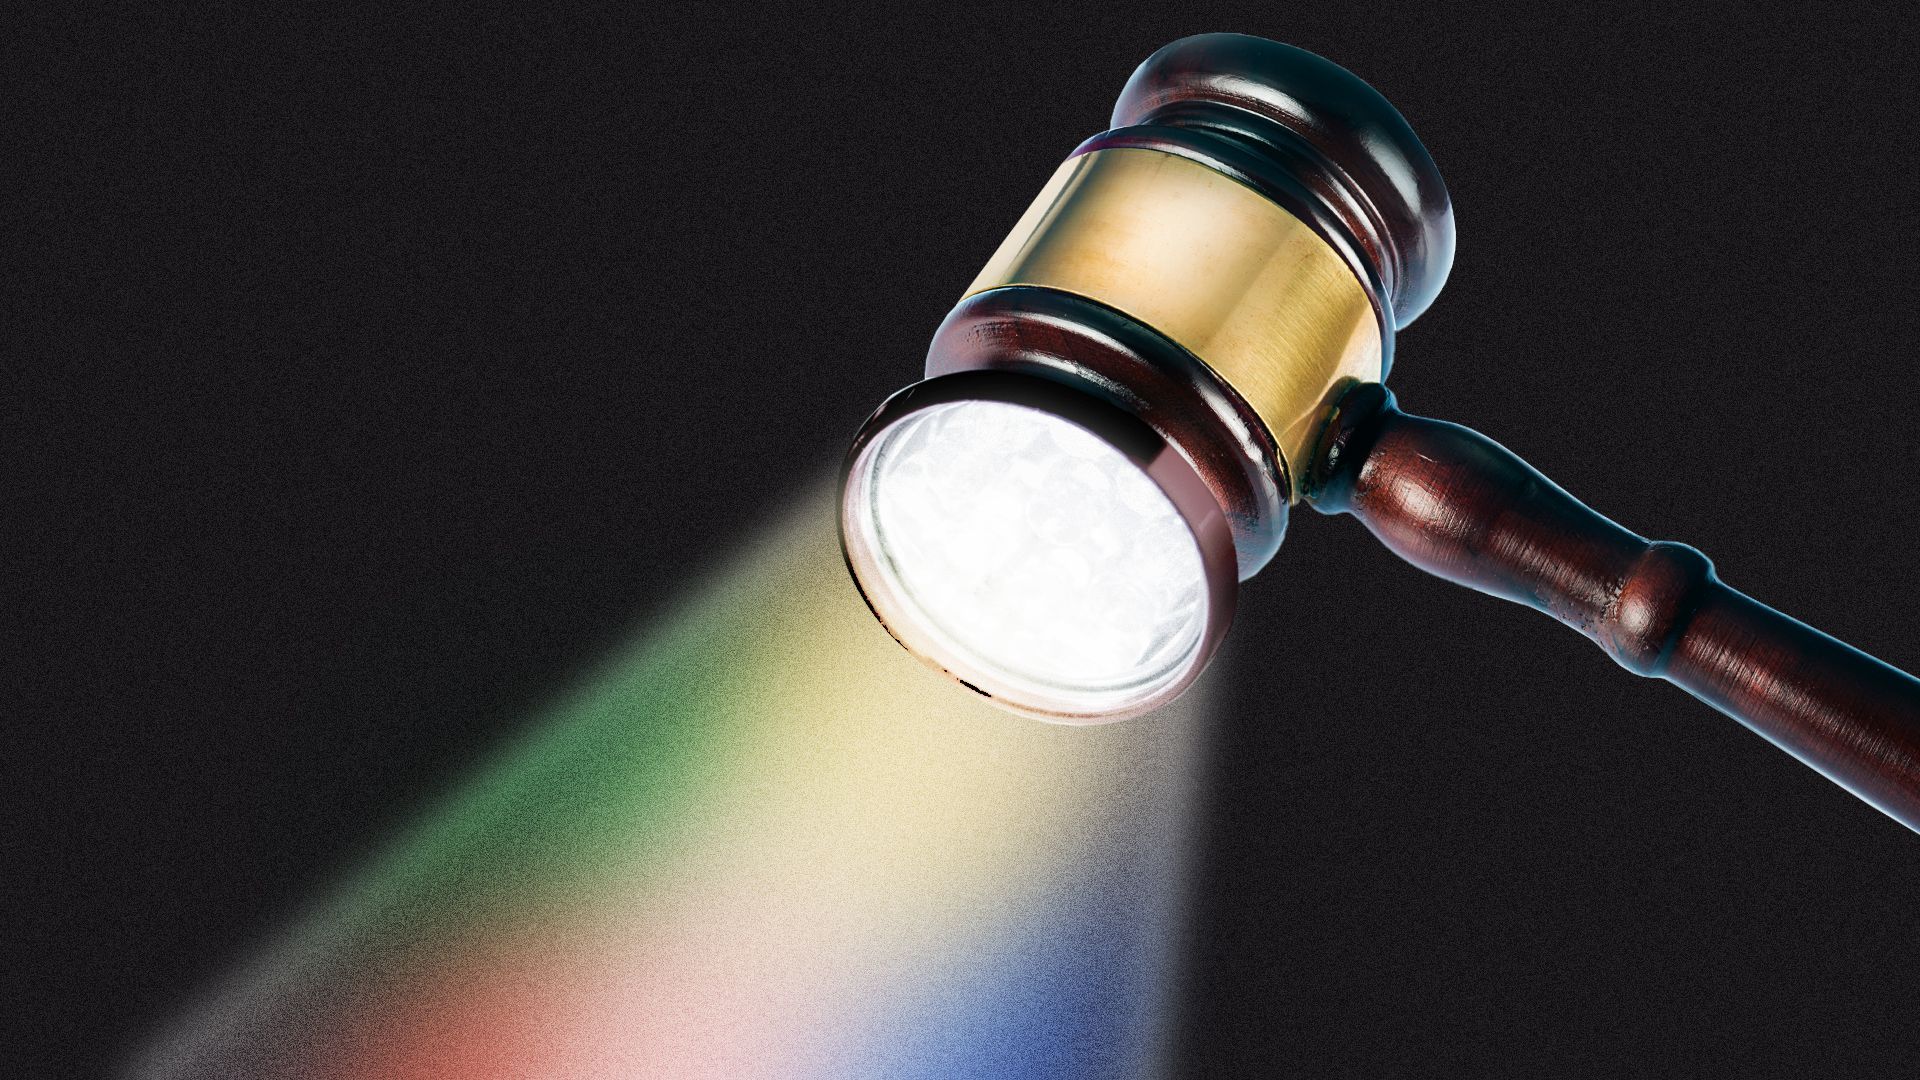 Illustration of a gavel with a flashlight head on one end, with its light filled with Google colors